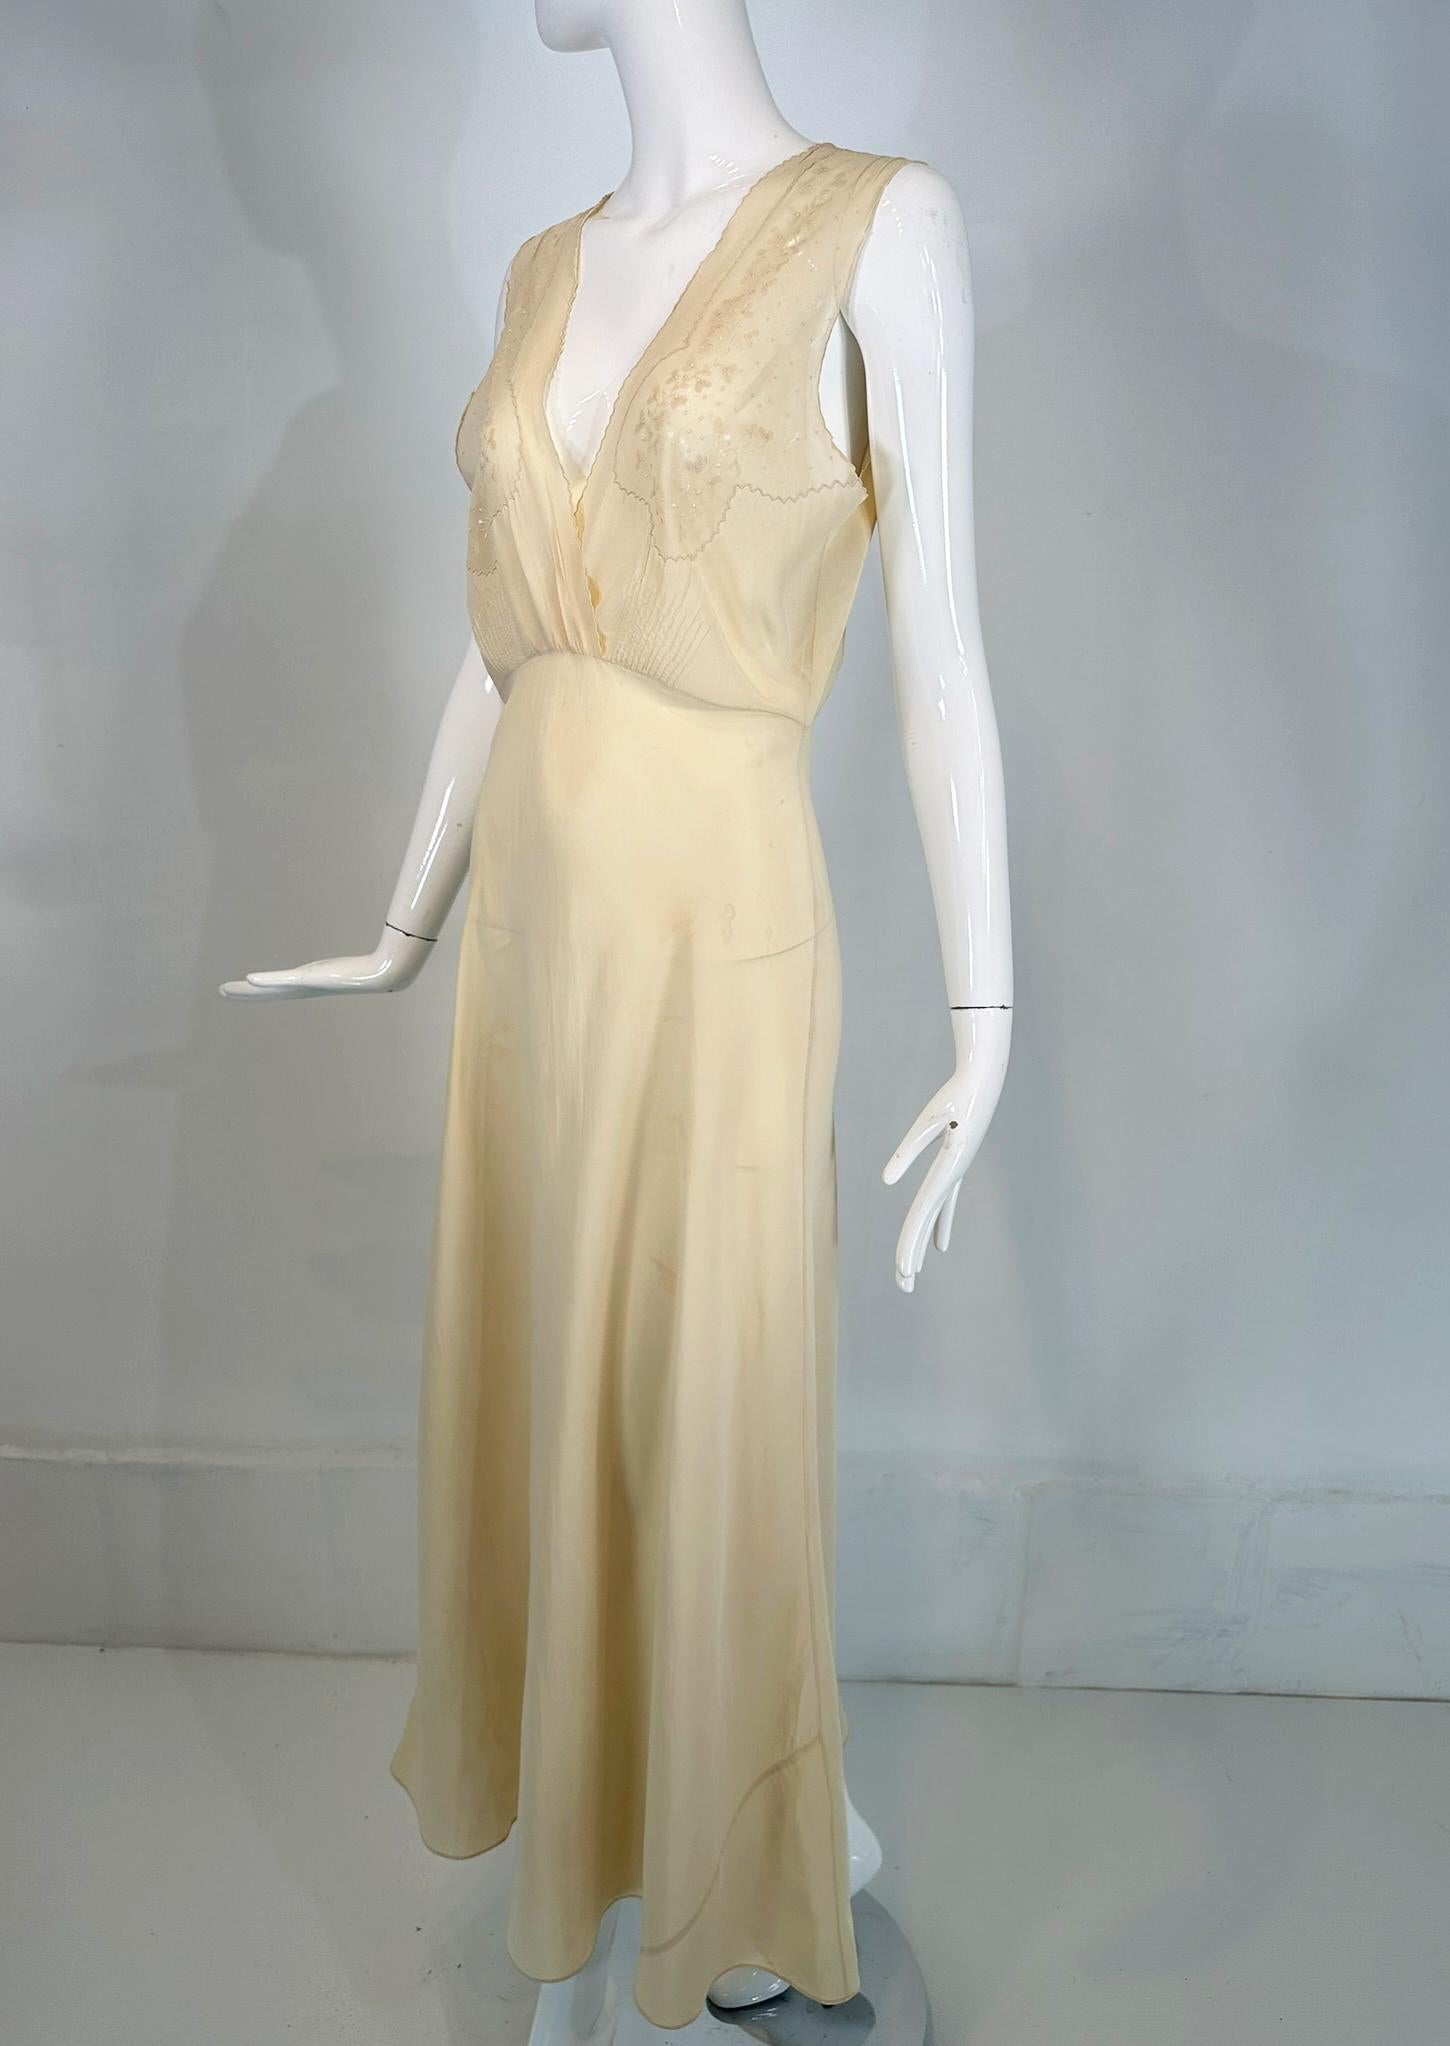 1930s Cream Bias Cut Sheer Silk Hand Embroidered & Appliqued Slip Dress Gown For Sale 9